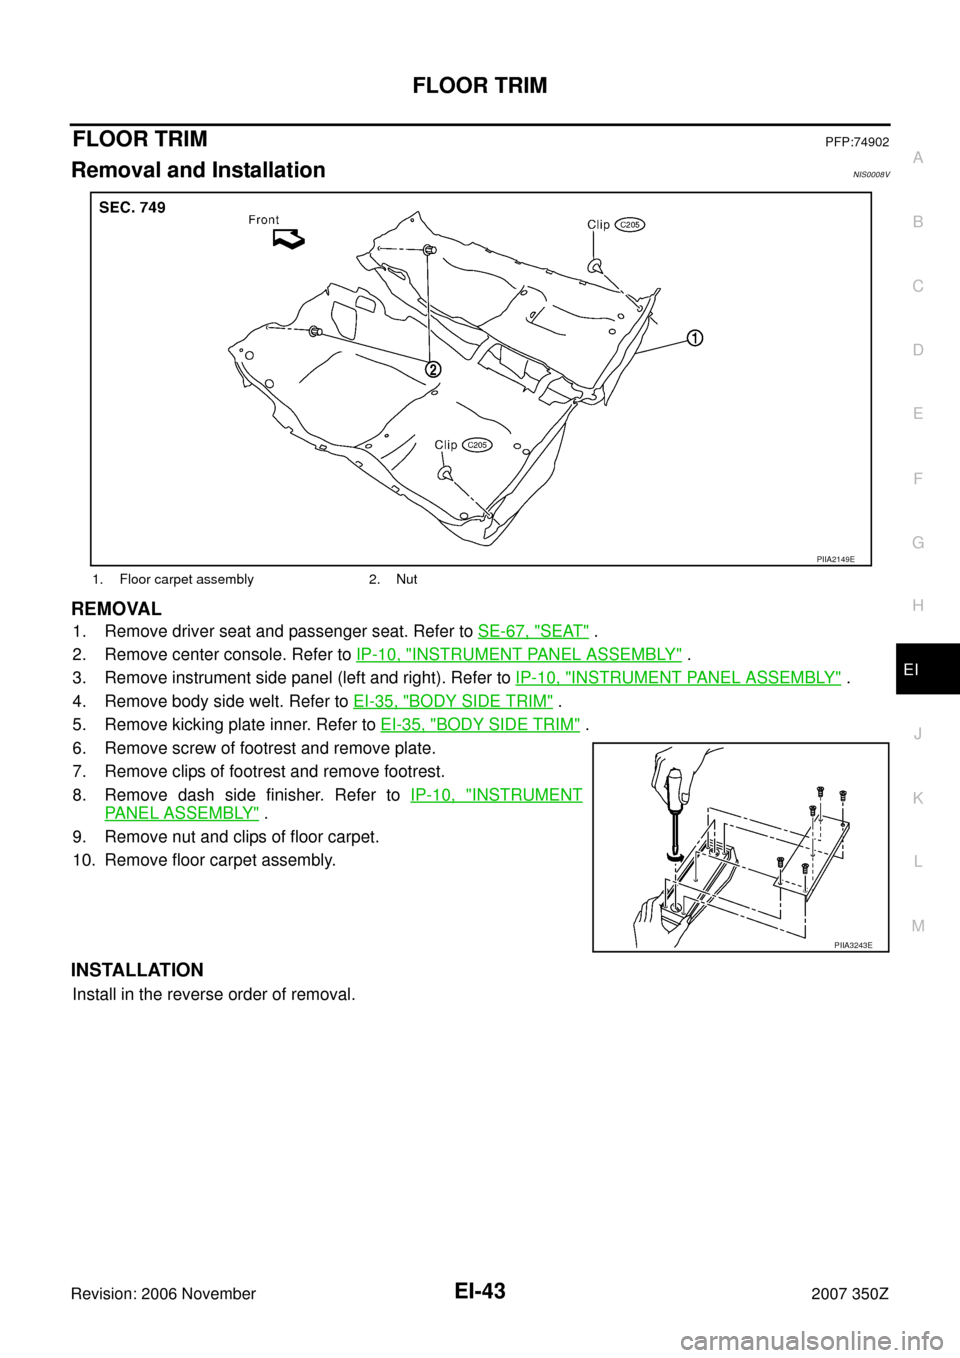 NISSAN 350Z 2007 Z33 Exterior And Interior Service Manual FLOOR TRIM
EI-43
C
D
E
F
G
H
J
K
L
MA
B
EI
Revision: 2006 November2007 350Z
FLOOR TRIMPFP:74902
Removal and InstallationNIS0008V
REMOVAL
1. Remove driver seat and passenger seat. Refer to SE-67, "SEAT